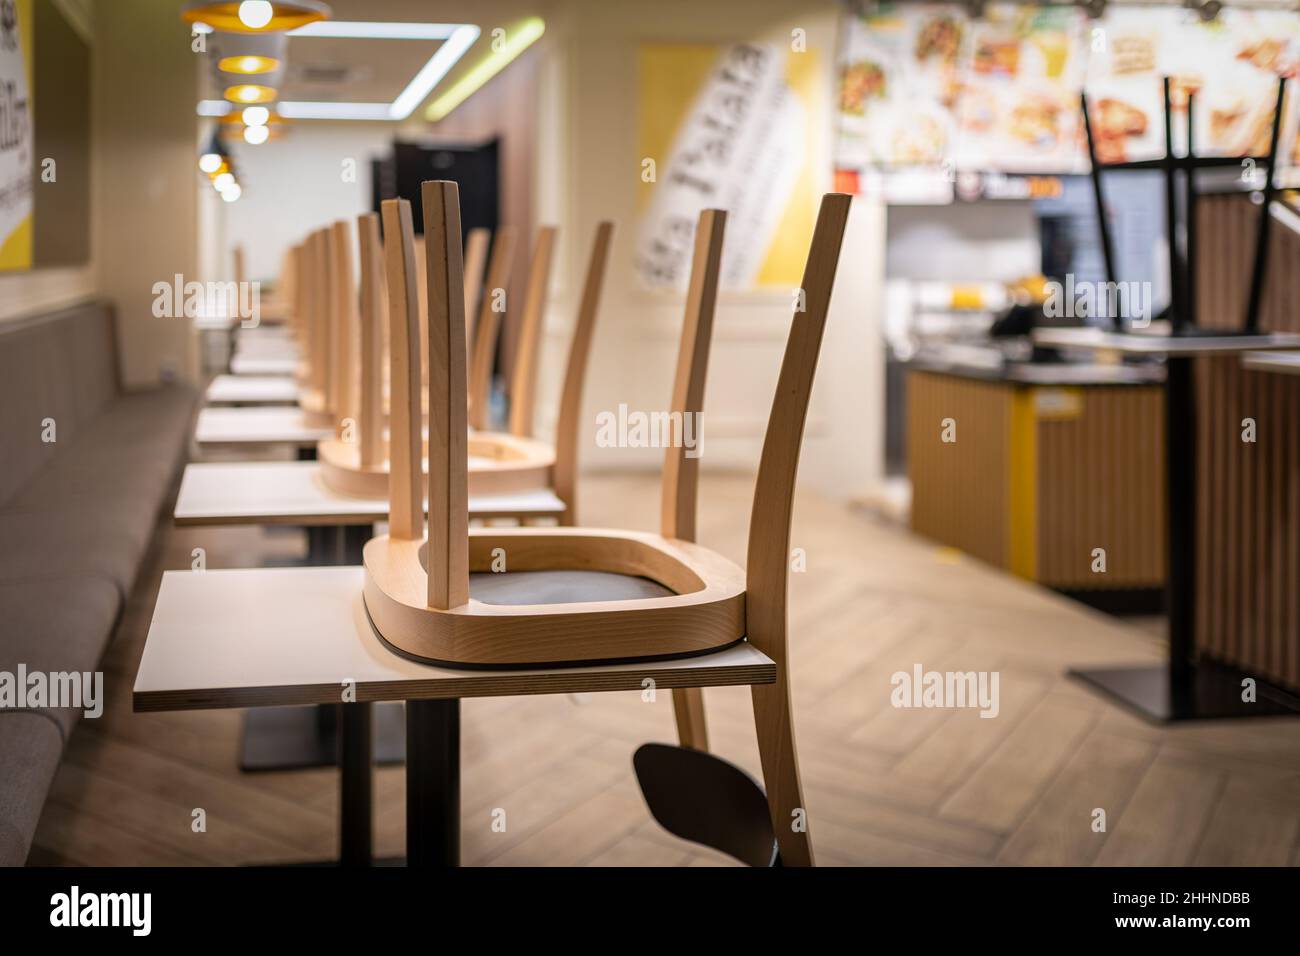 losed restaurant with chairs on tables because of lockdown or shutdown. Stock Photo